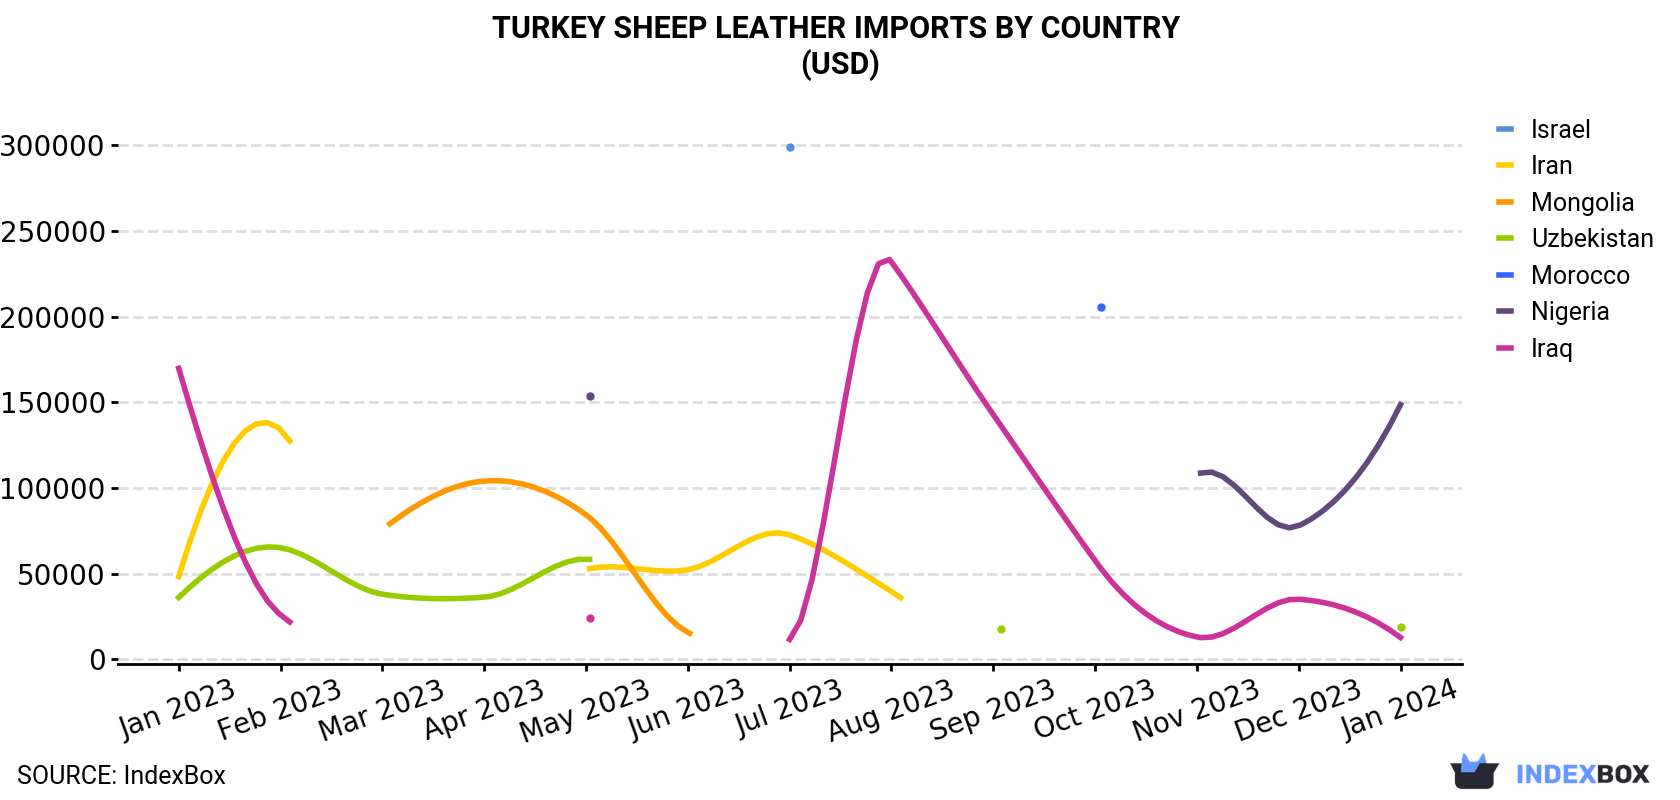 Turkey Sheep Leather Imports By Country (USD)